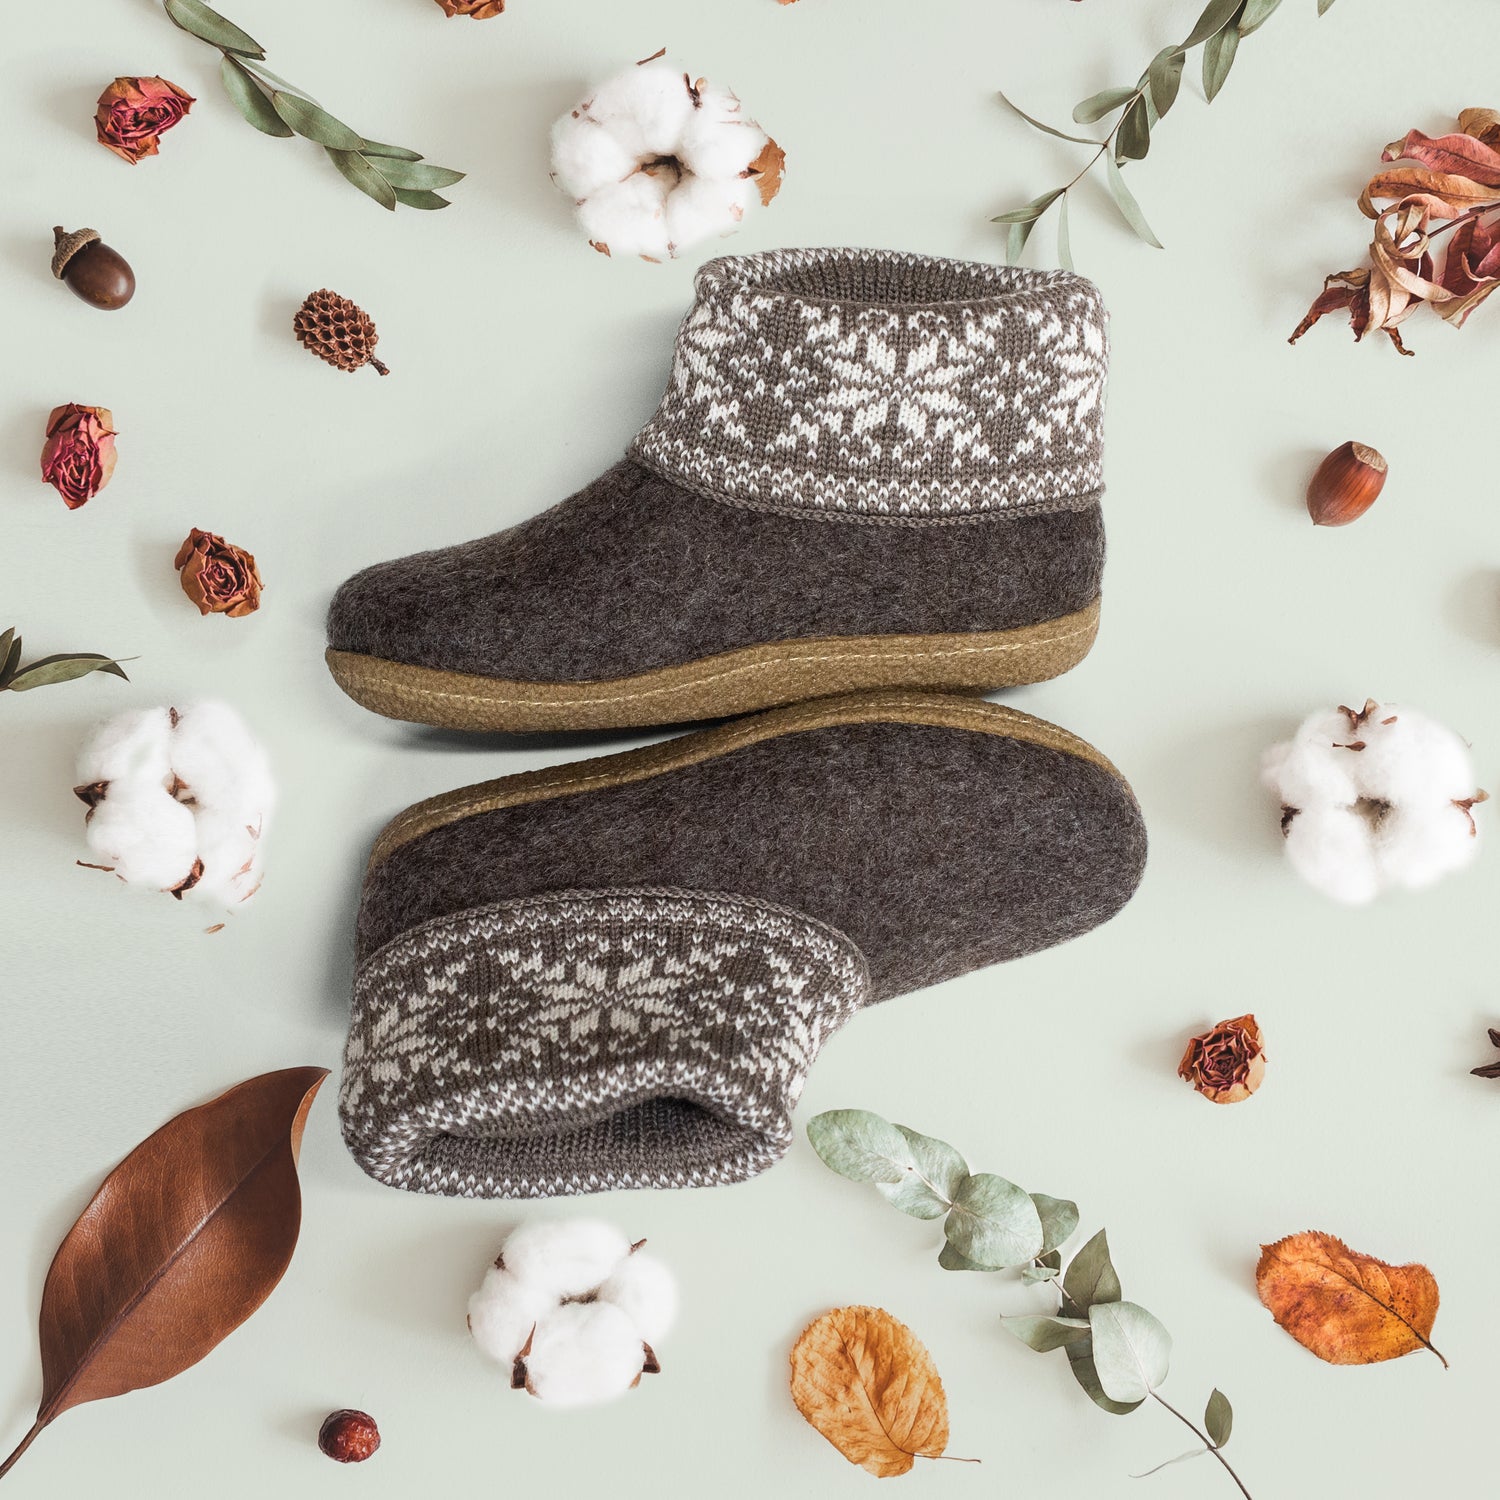 Women's WOOBOOTS with Knitted Leg Warmers, Hand Felted by BureBure –  BureBure shoes and slippers